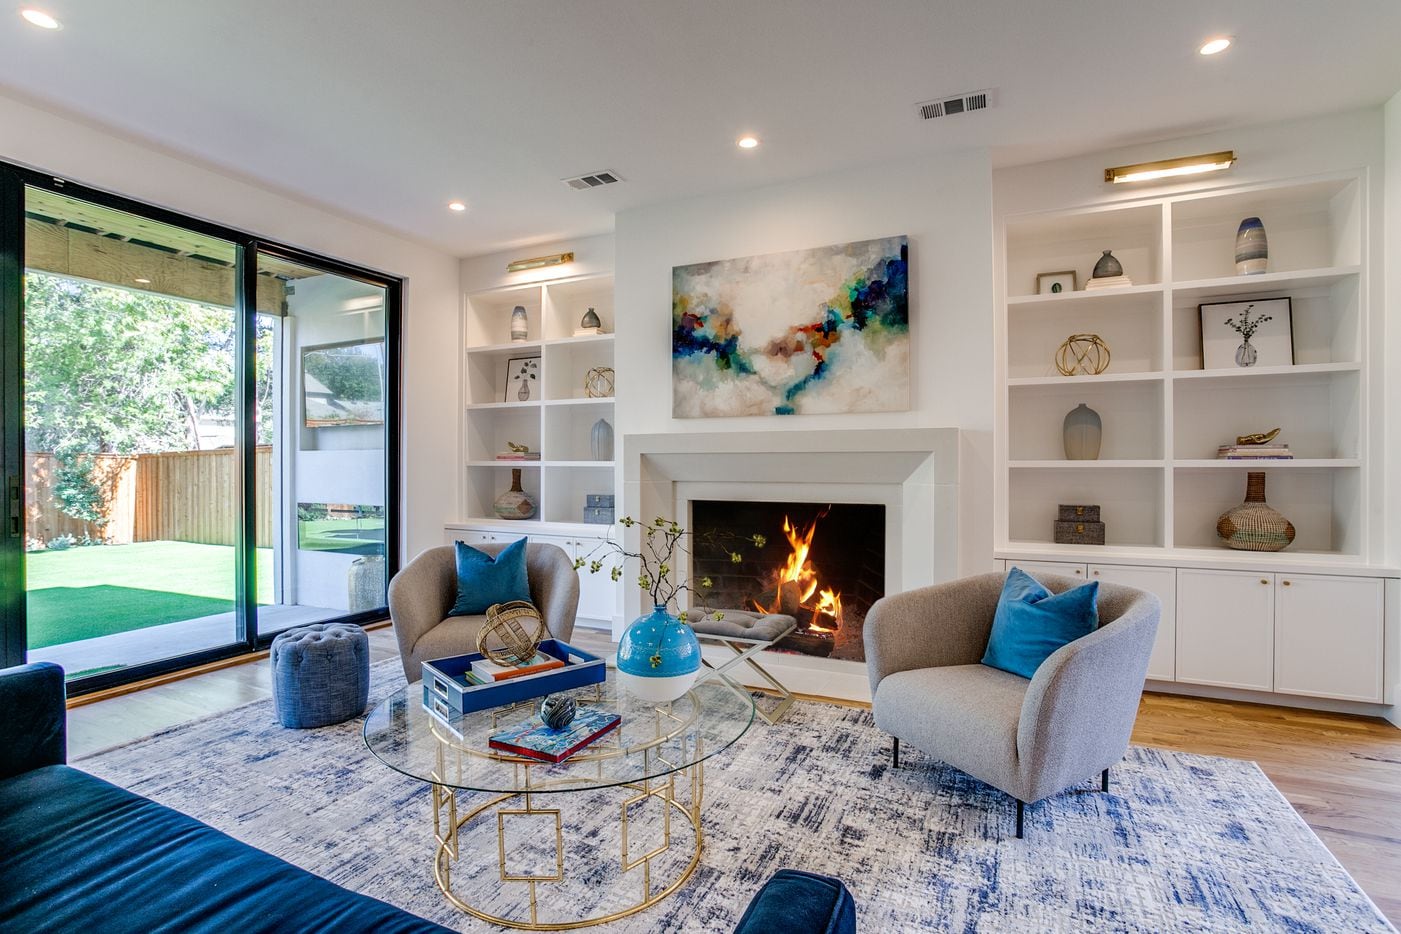 The living area features a cozy fireplace, built-in bookshelves and ample seating.